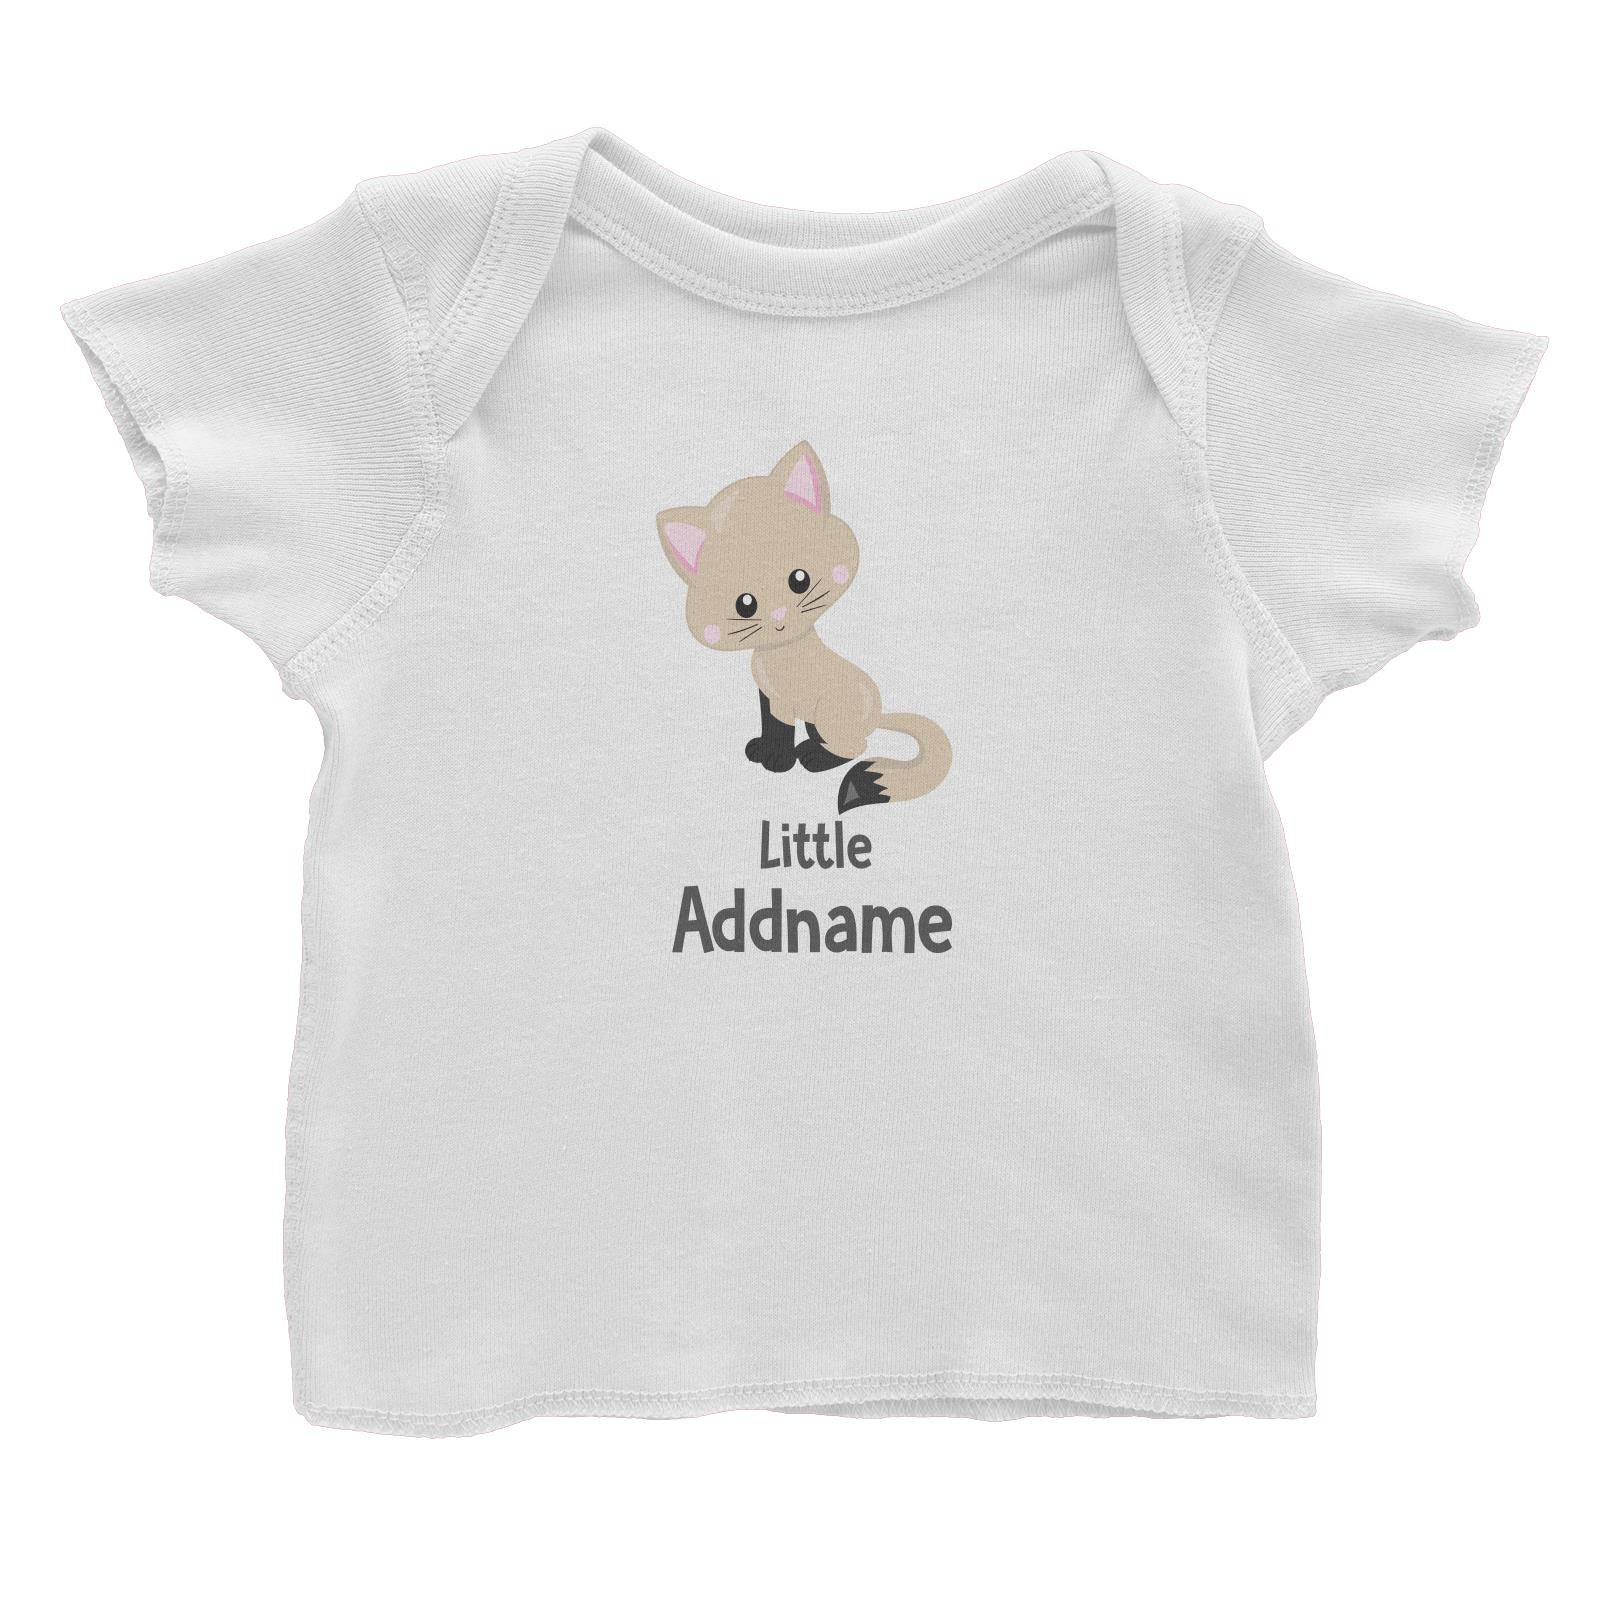 Adorable Cats Light Brown Cat with Black Legs Little Addname Baby T-Shirt